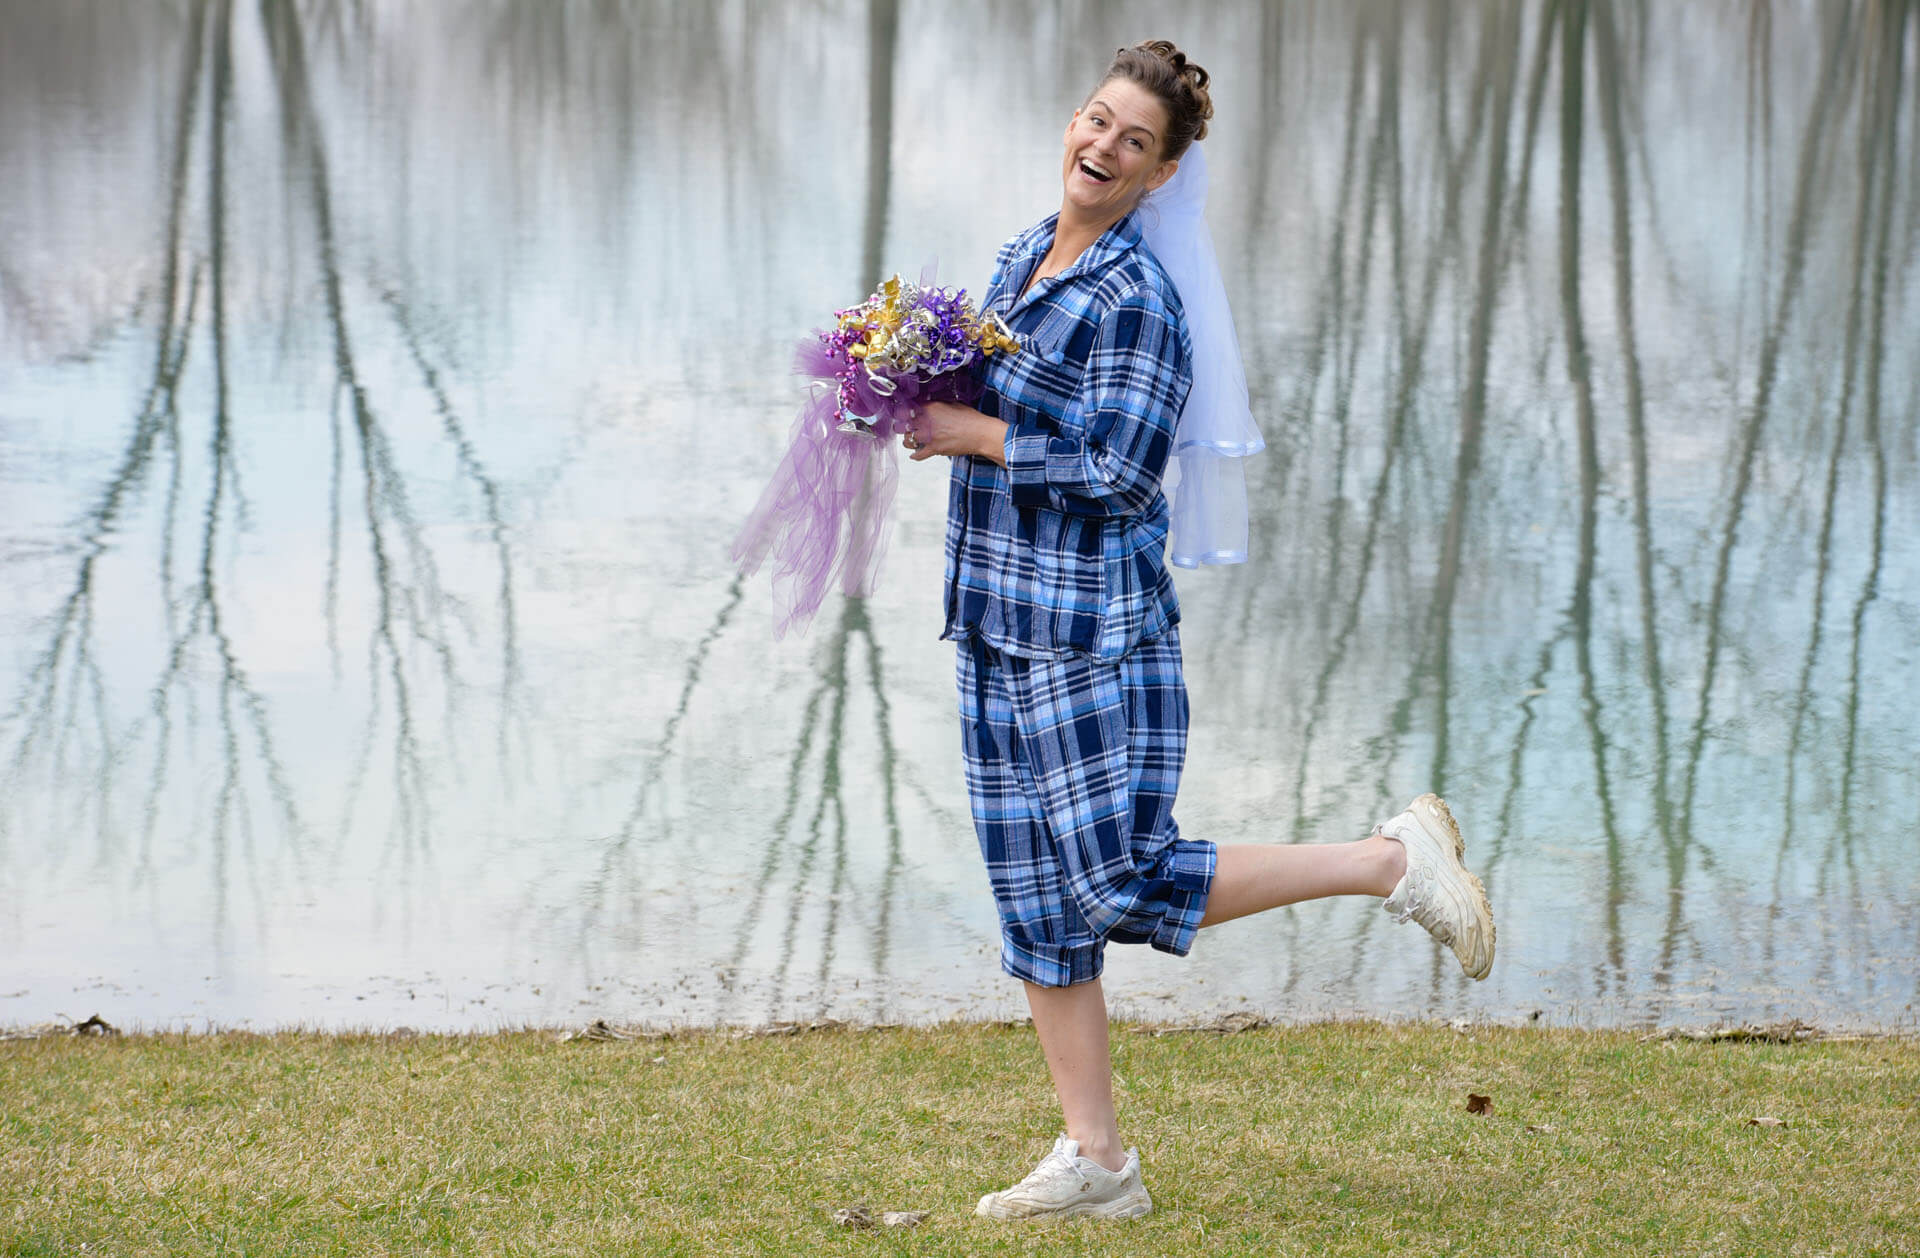 Epic wedding portrait of the bride posing at her country home in her pajamas before finishing getting ready for her wedding in Metro Detroit, Michigan.